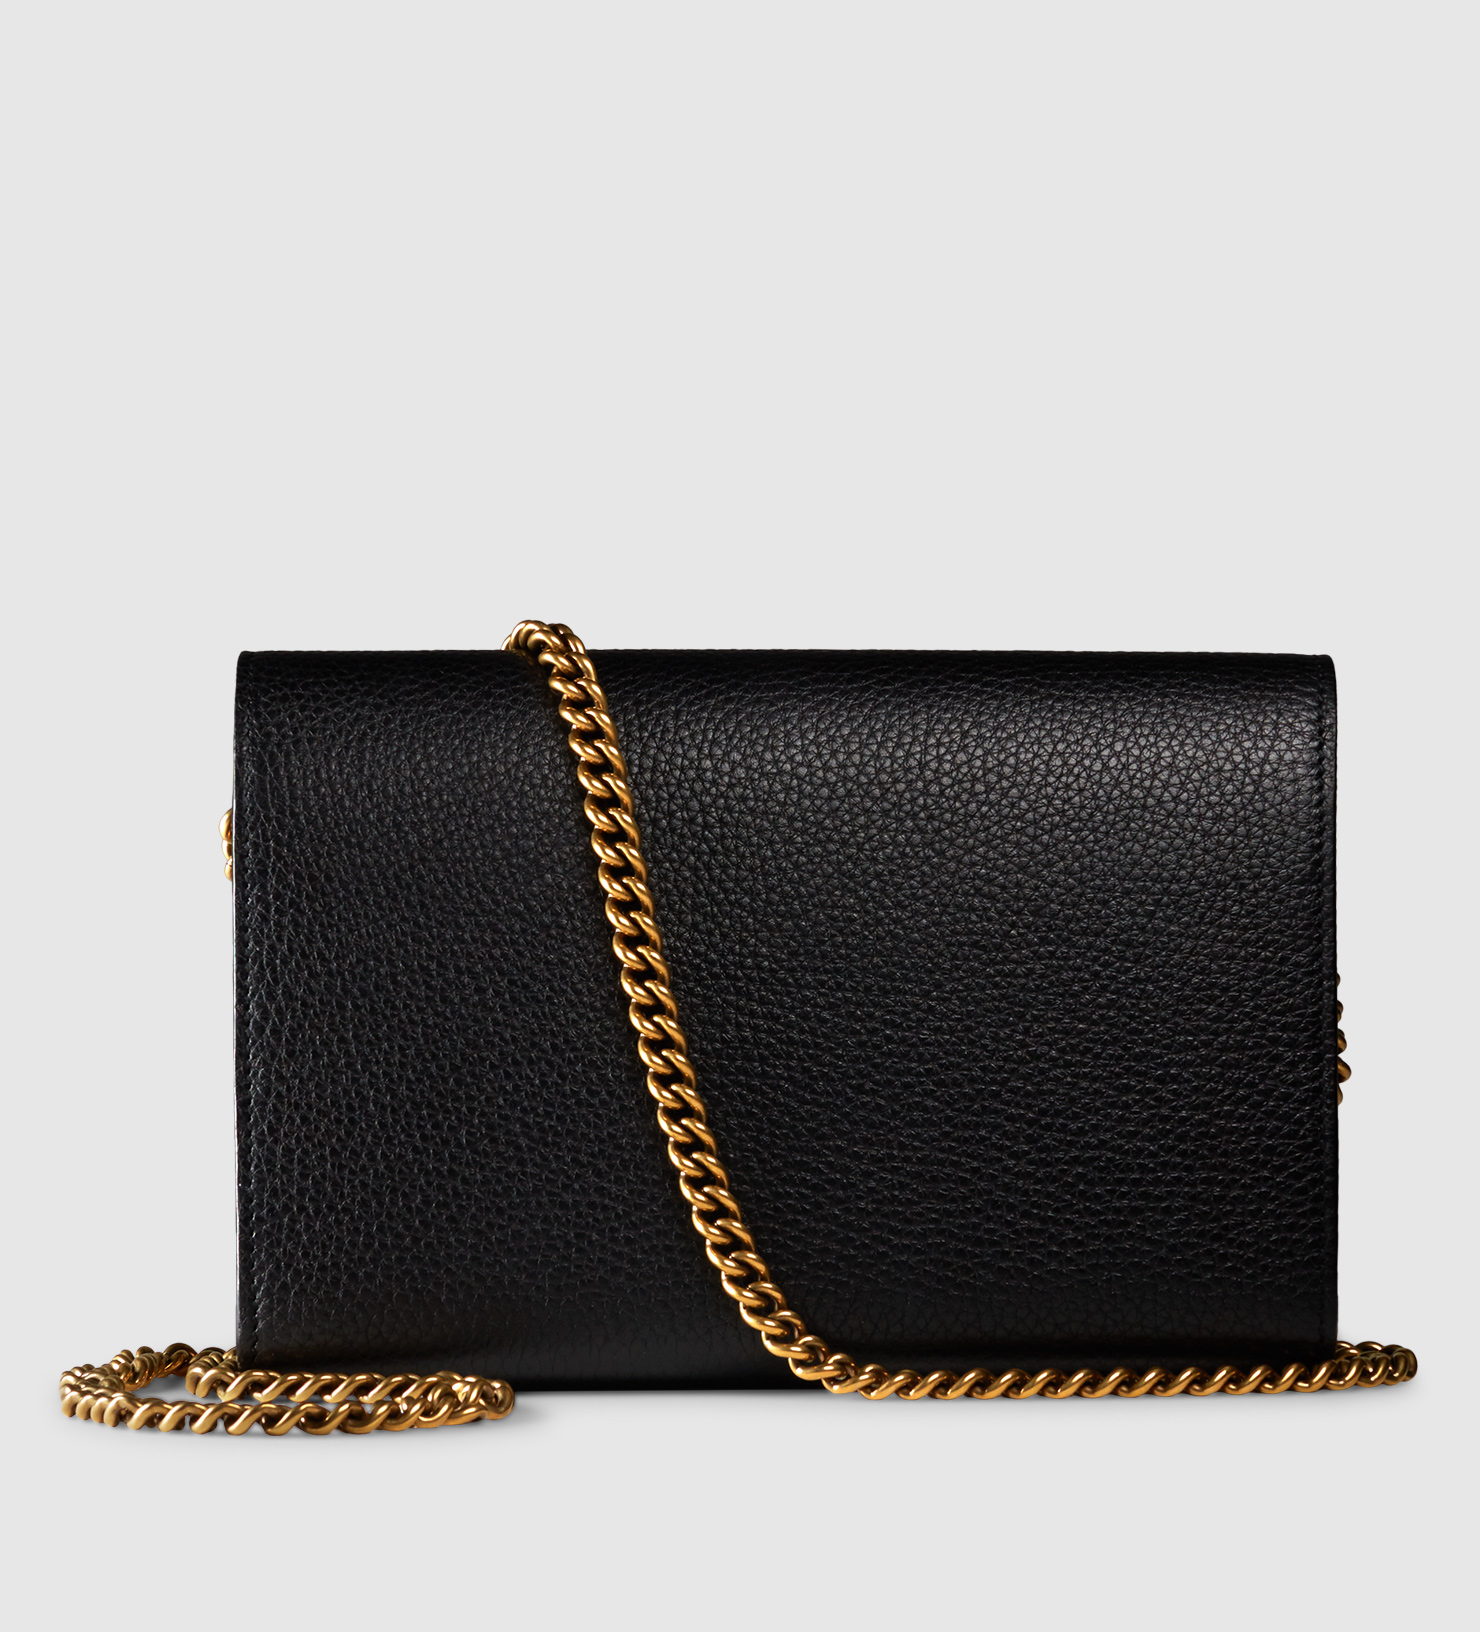 Gucci Gg Marmont Leather Chain Wallet in Black | Lyst